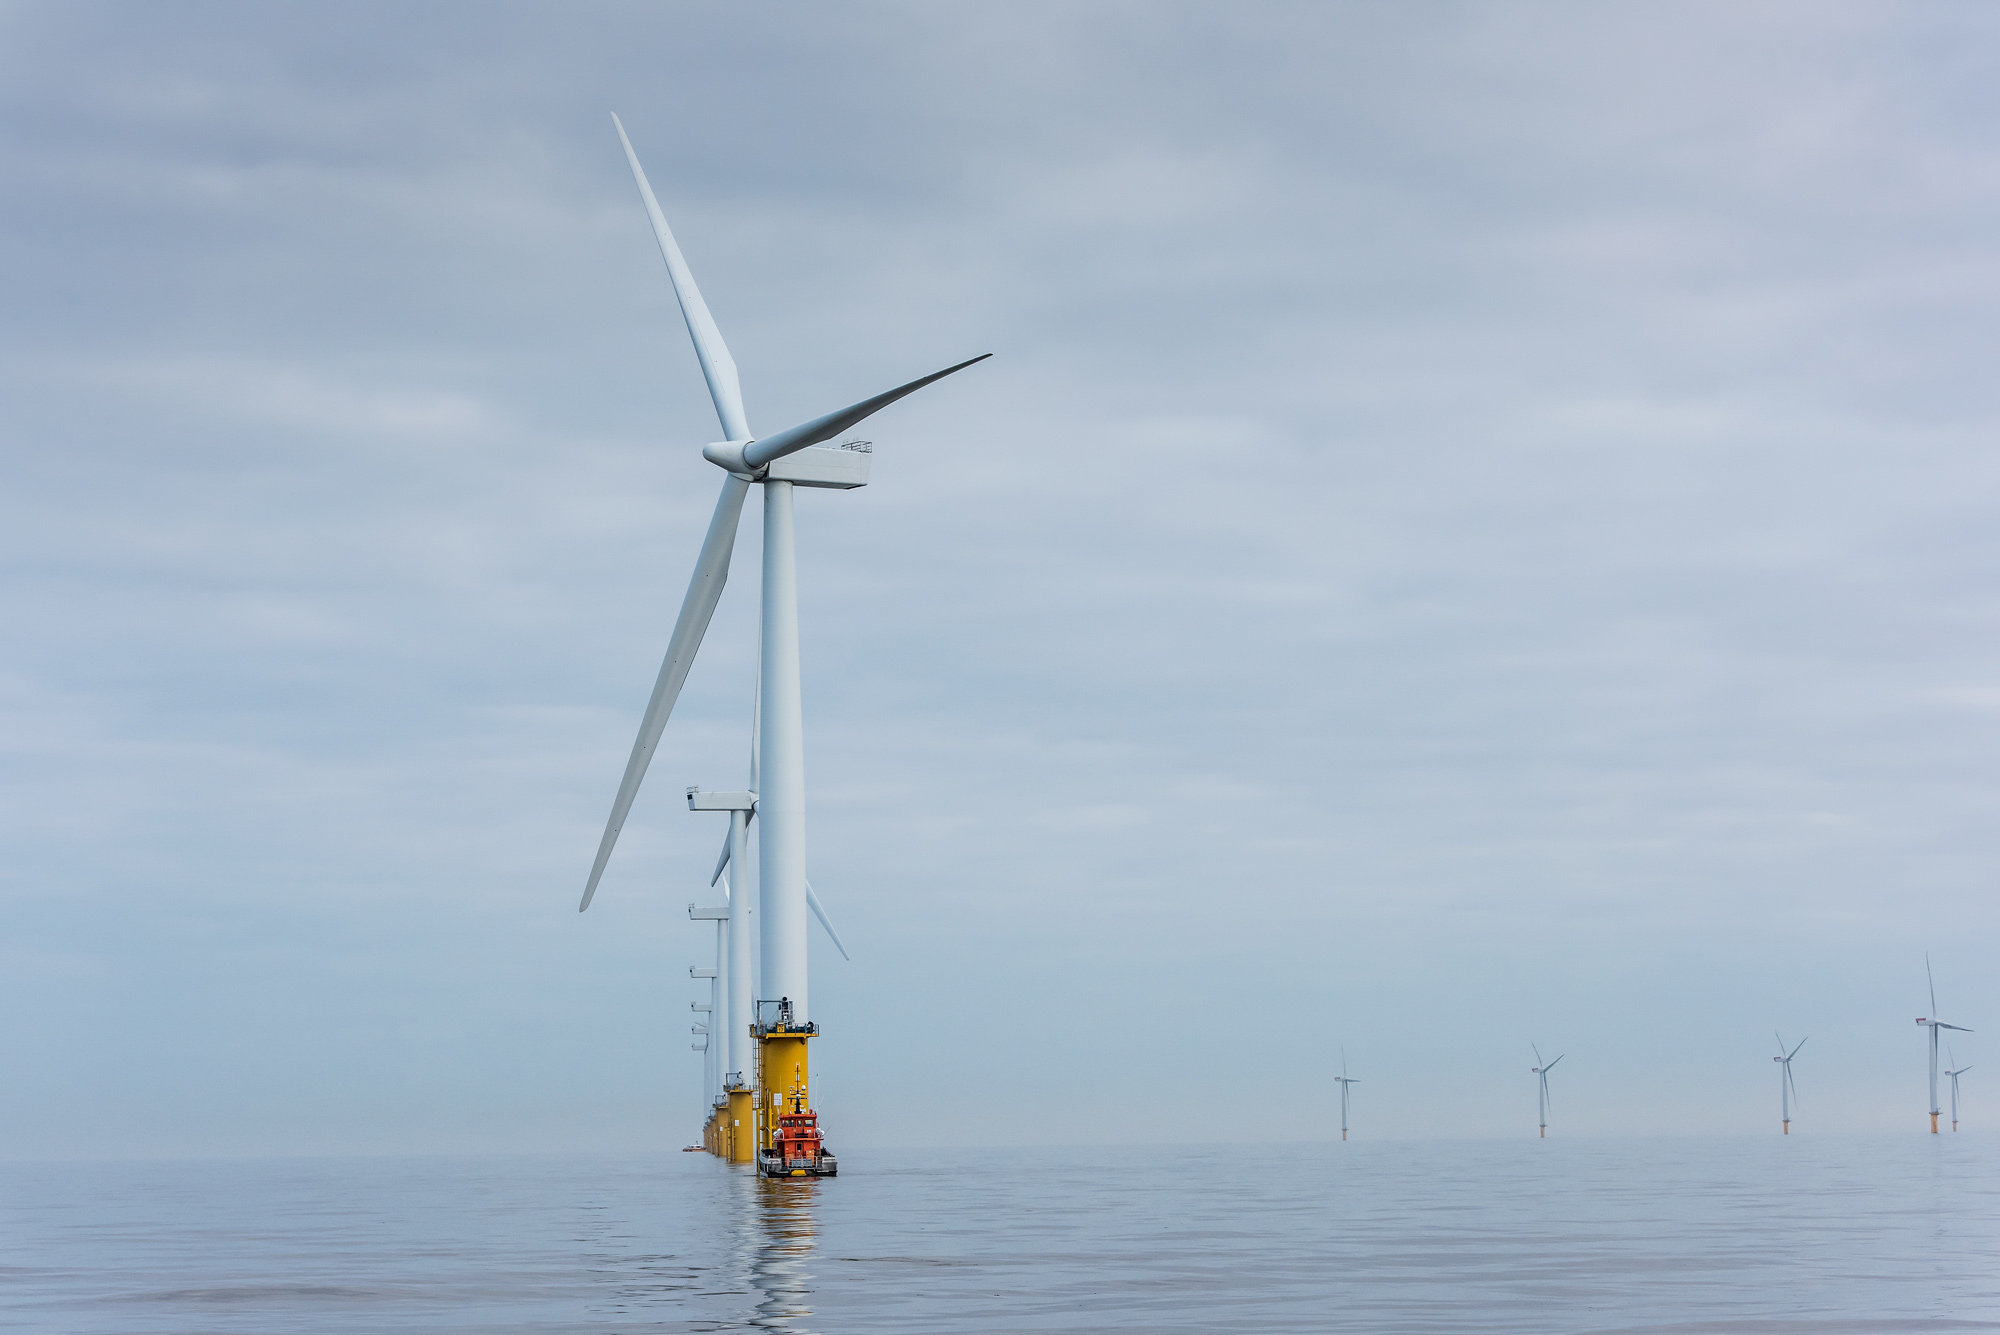 Texas Public Policy Foundation: The Environmental Impact of Offshore Wind